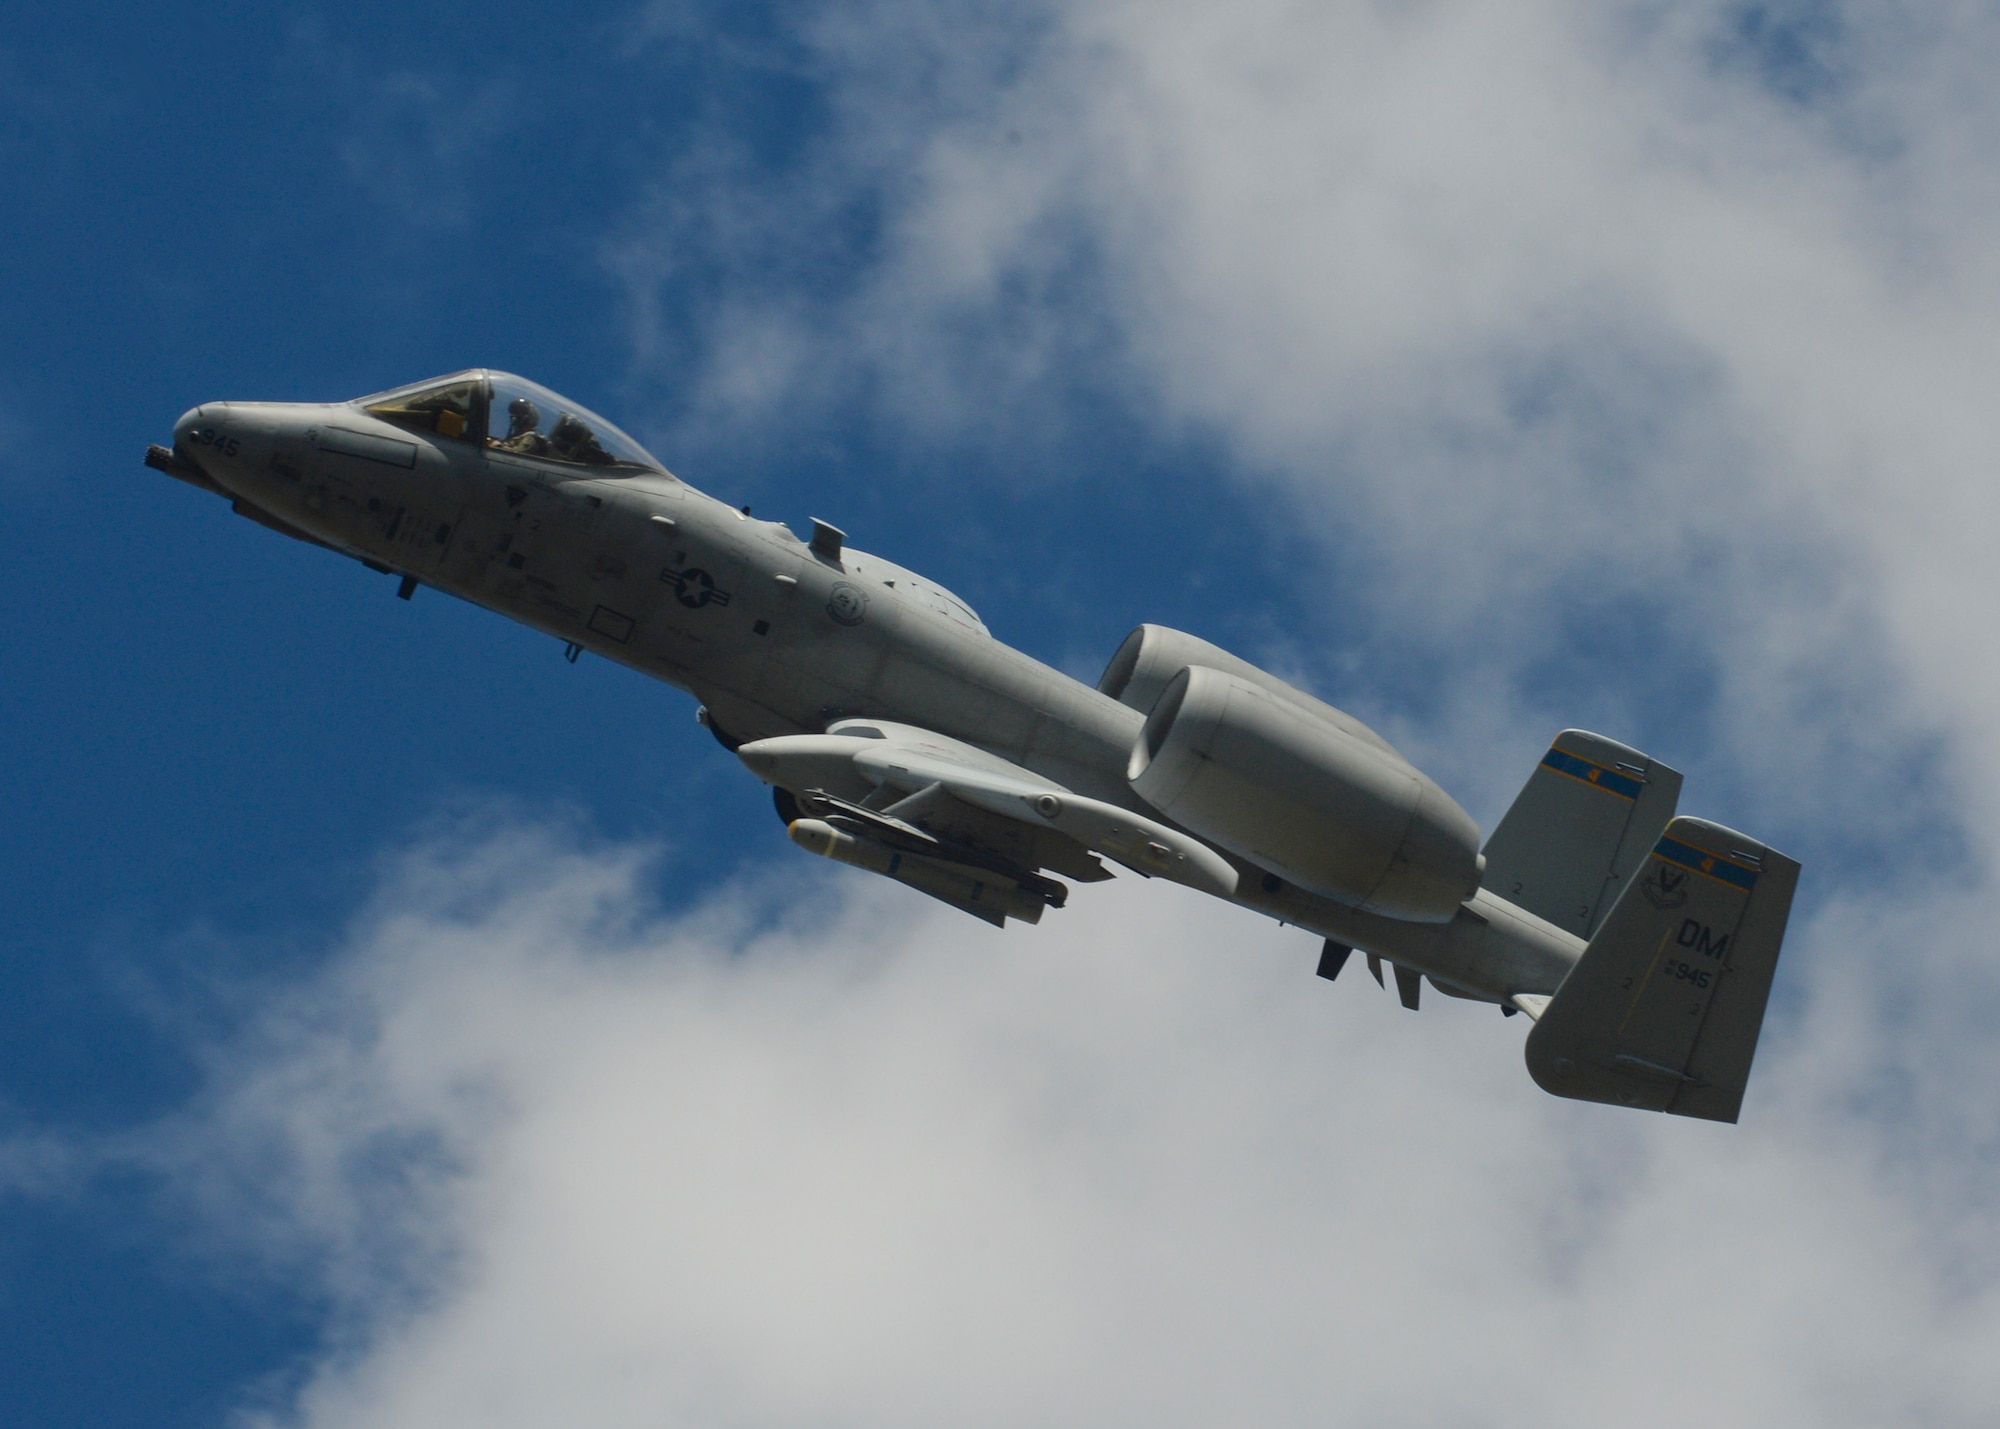 A U.S. Air Force A-10 Thunderbolt II assigned to the 354th Expeditionary Fighter Squadron flies during a theater security package deployment at Campia Turzii, Romania, April 1, 2015. The aircraft will forward deploy to locations in Eastern European NATO countries as part of the TSP. (U.S. Air Force photo by Staff Sgt. Joe W. McFadden/Released)